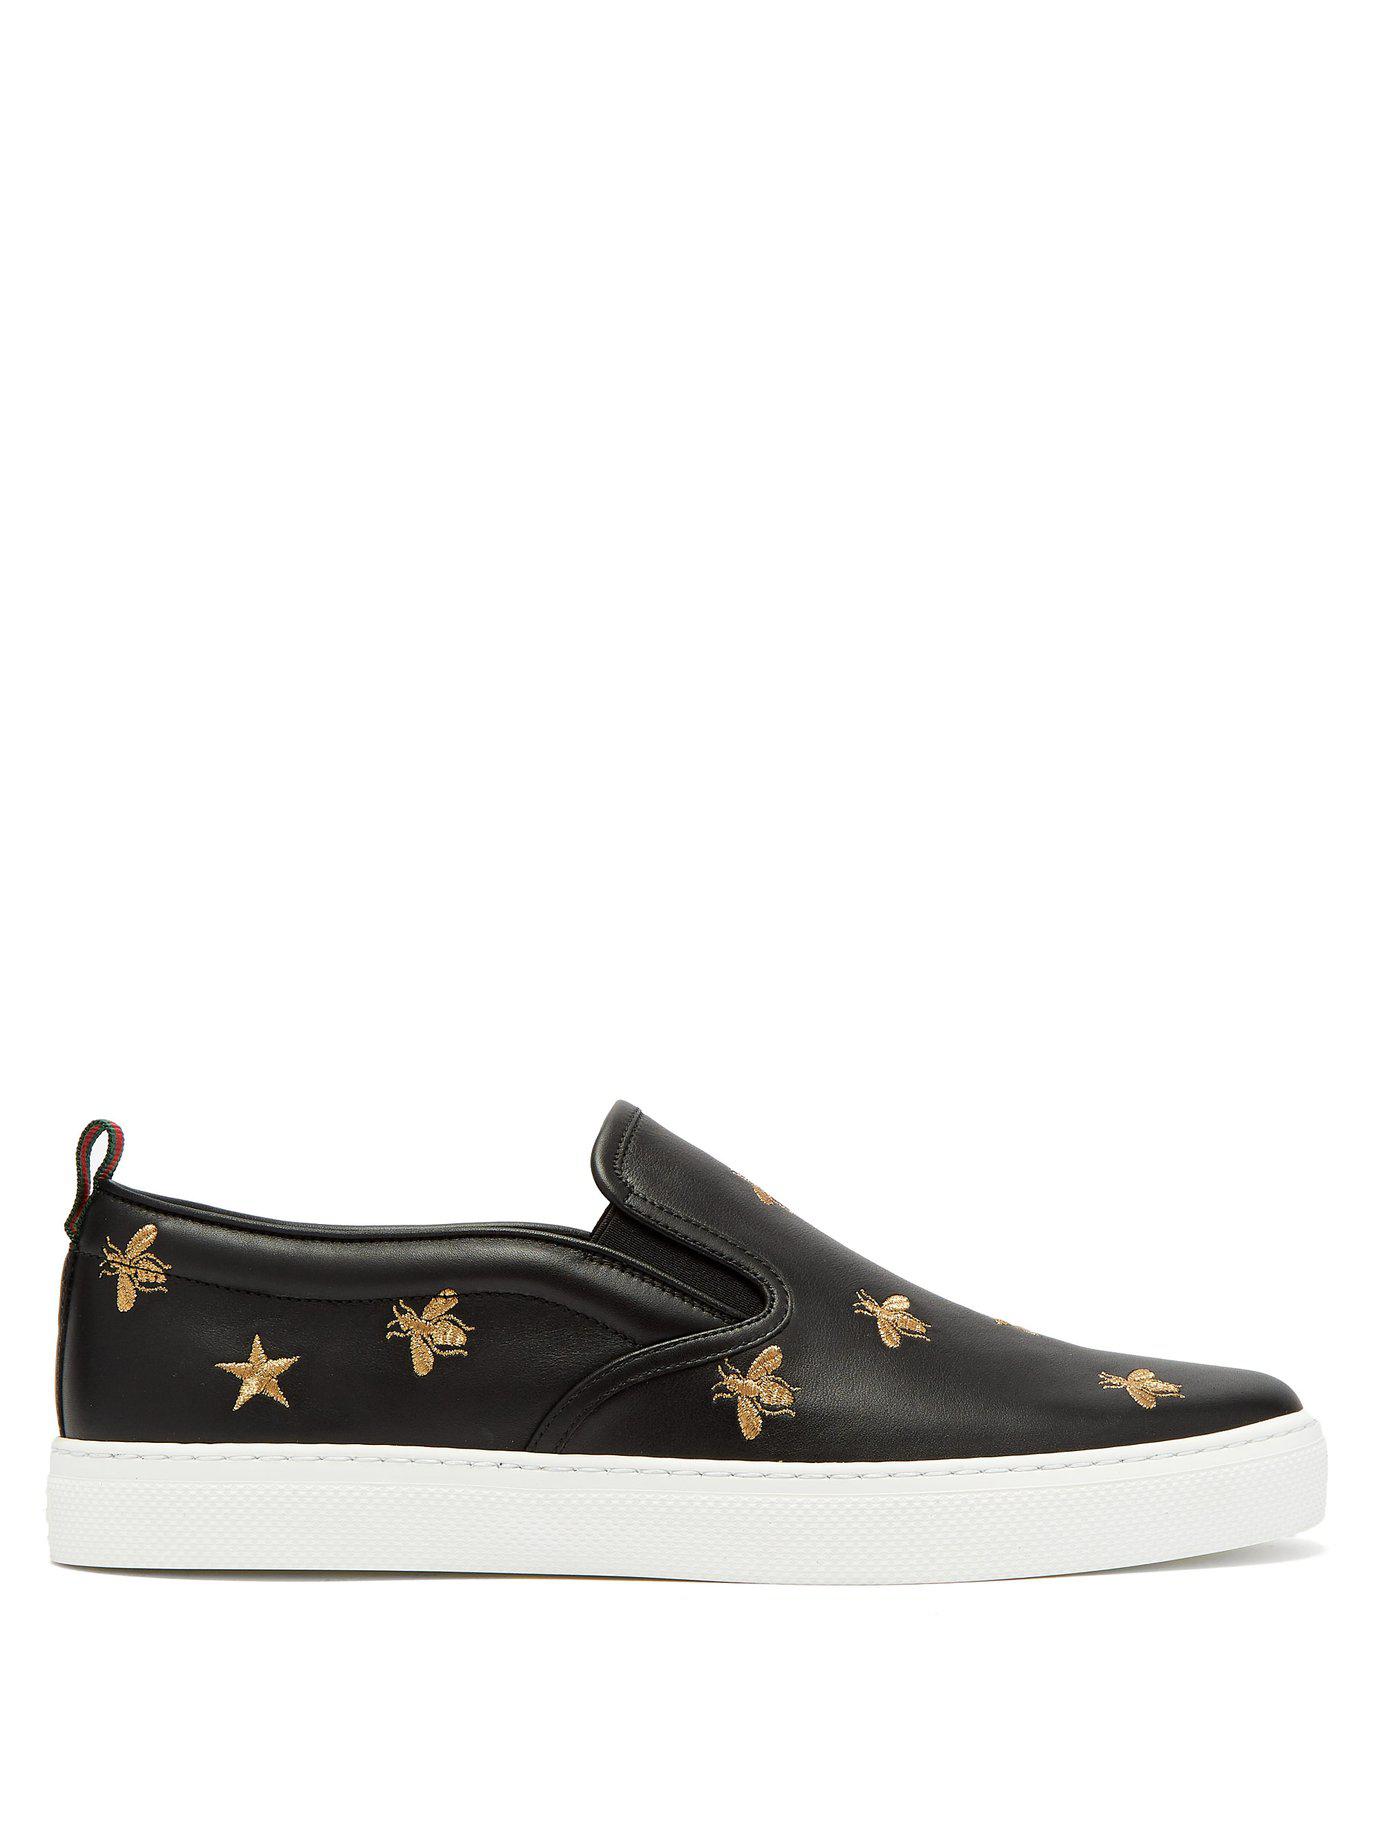 bison gift aflivning Gucci Leather Slip-on Sneakers With Bees in Black for Men - Lyst